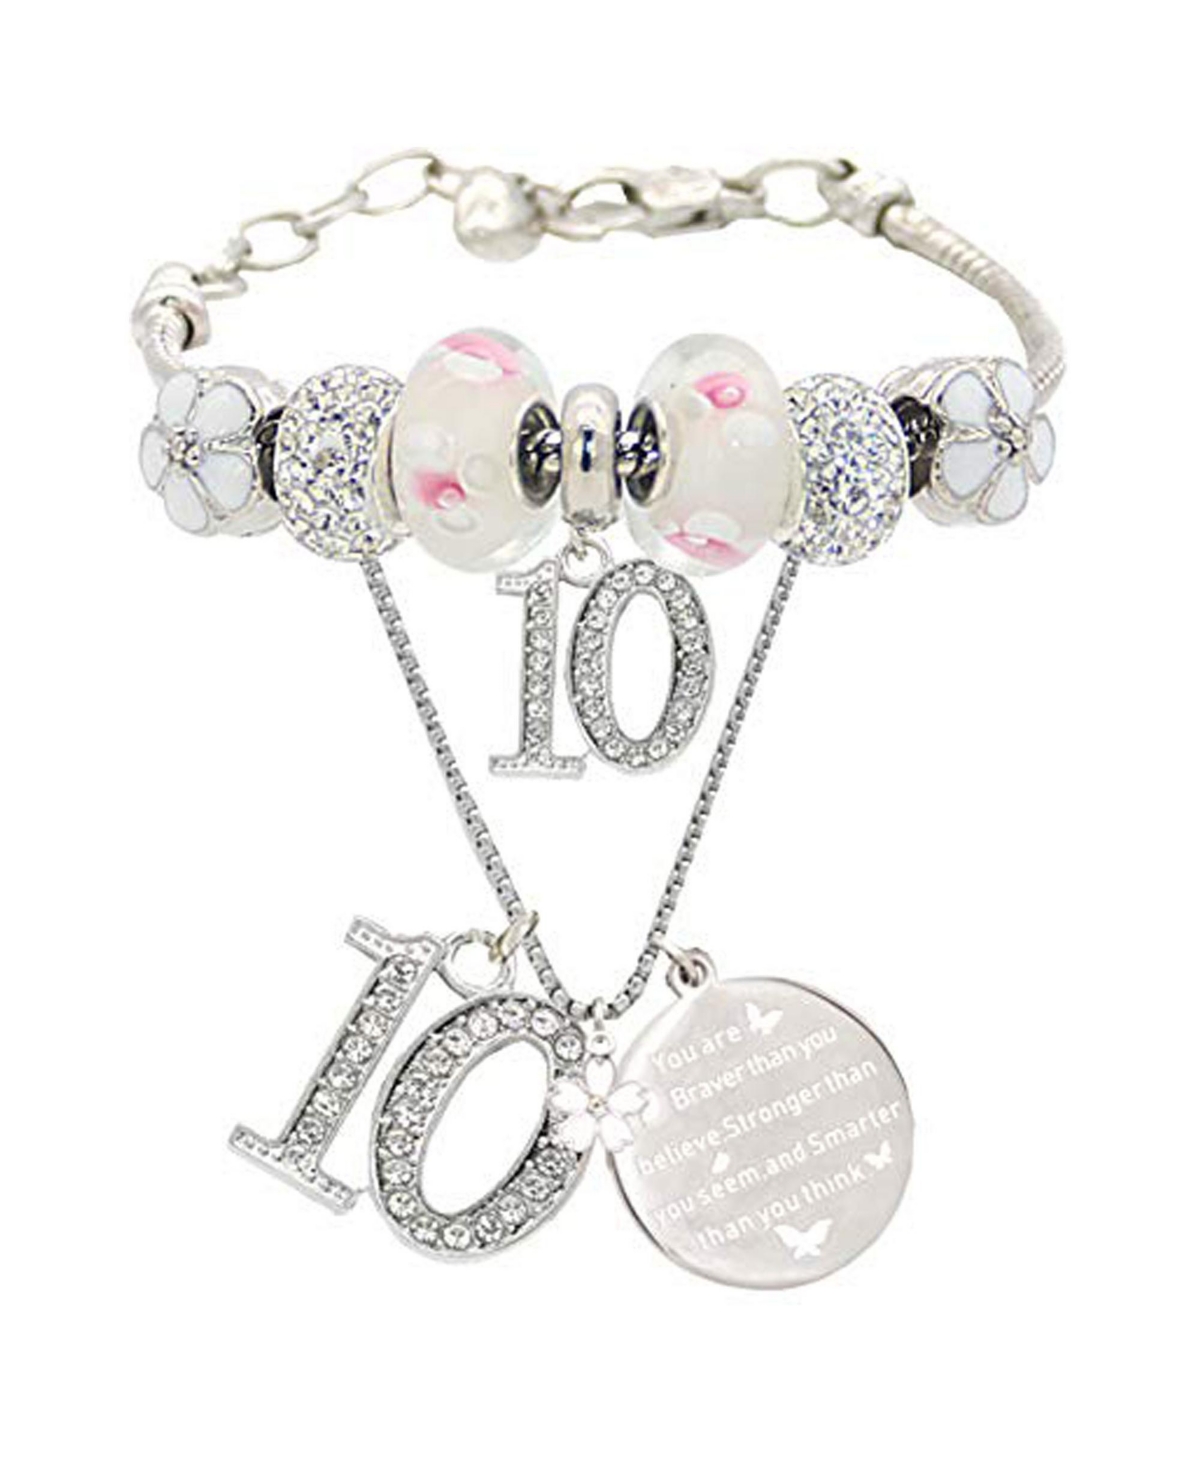 10th Birthday Gifts for Girls: Jewelry Set with Necklace and Charm Bracelet for 10-Year-Old Girl - Silver